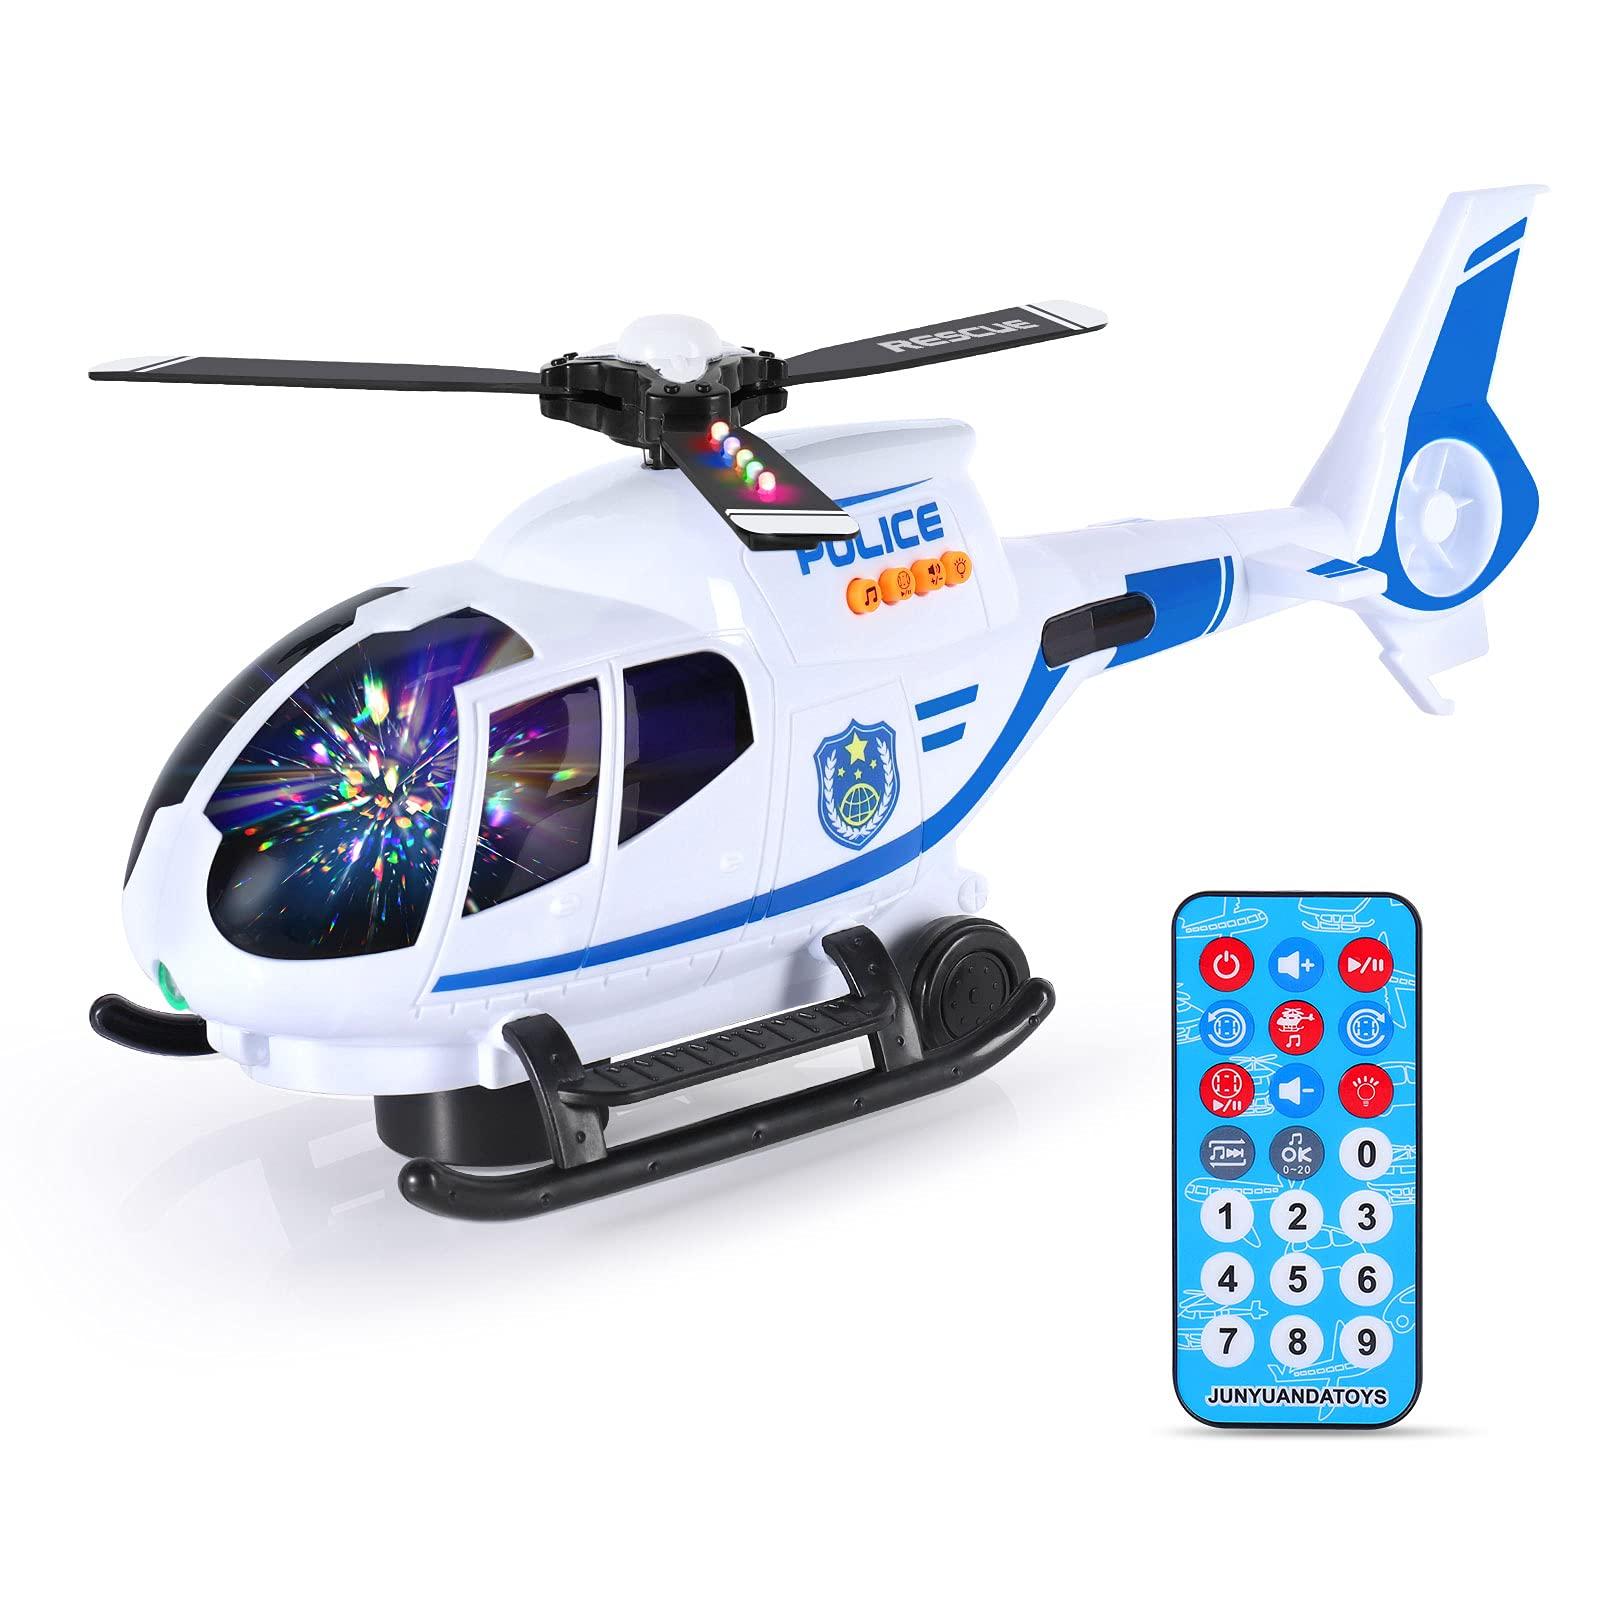 Aeroplane Helicopter Remote Control: Key Features of Aeroplane Helicopter Remote Control